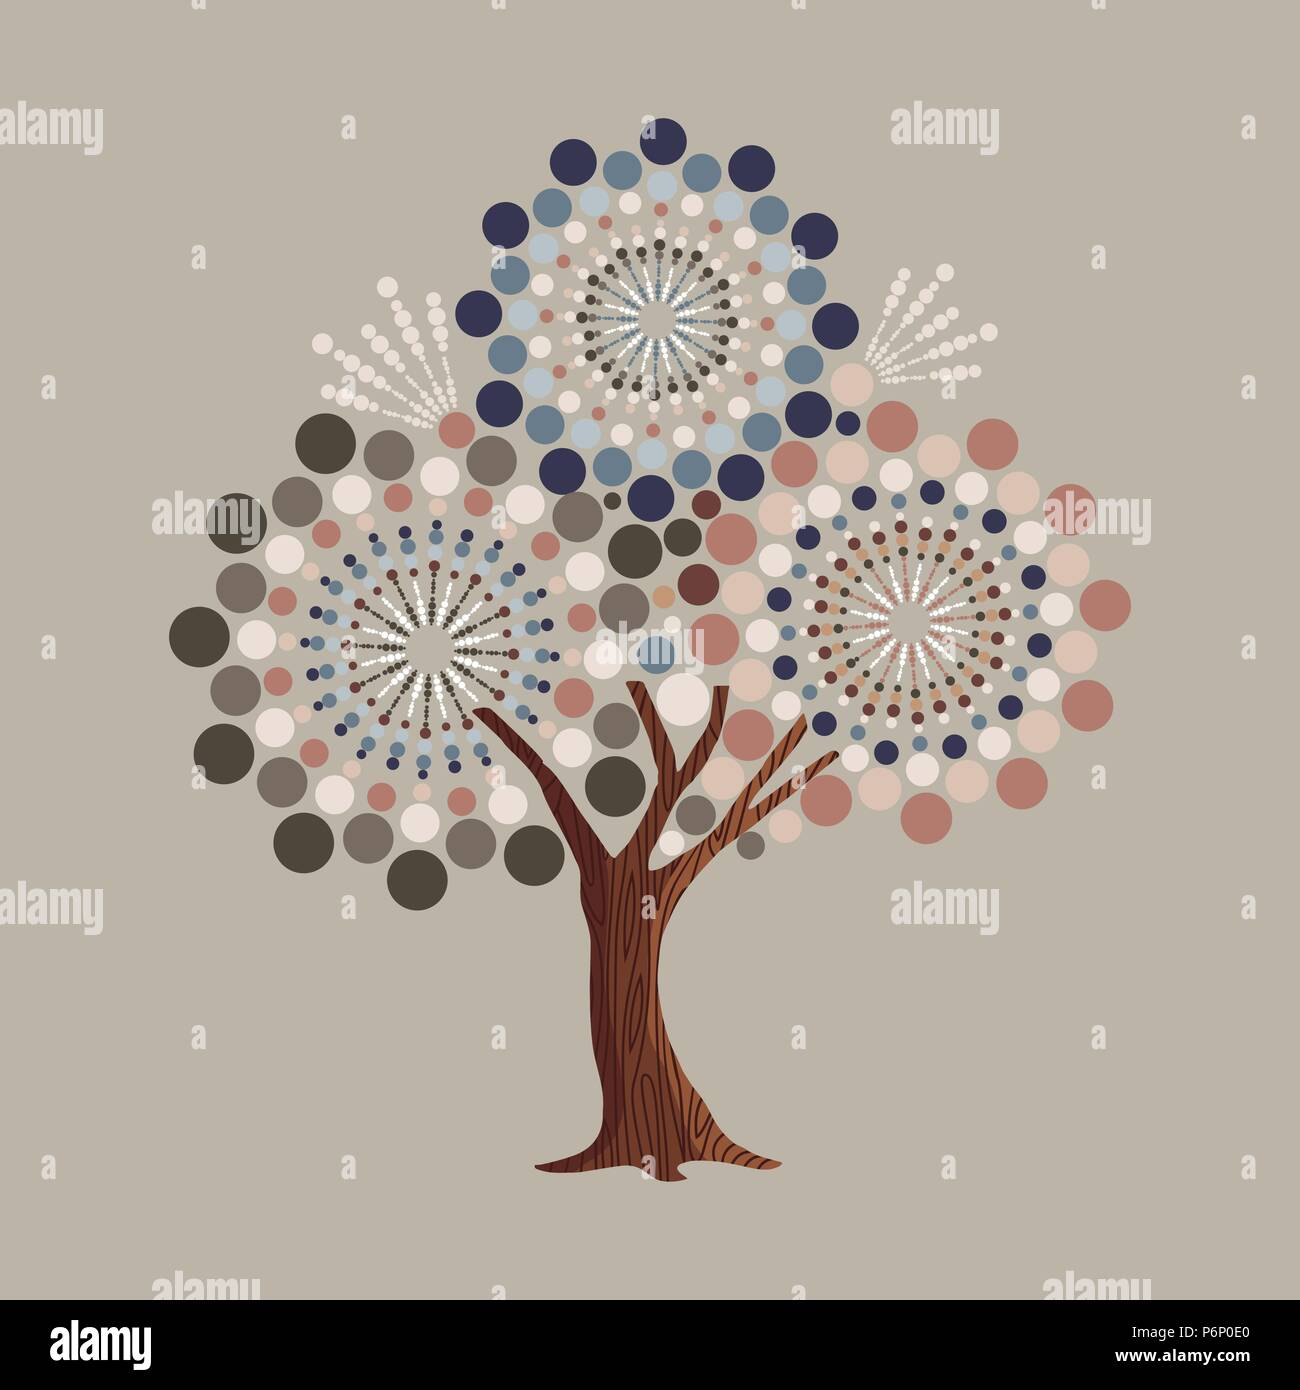 Tree made of abstract circle shapes. Vintage color geometric texture for fun conceptual idea. EPS10 vector. Stock Vector